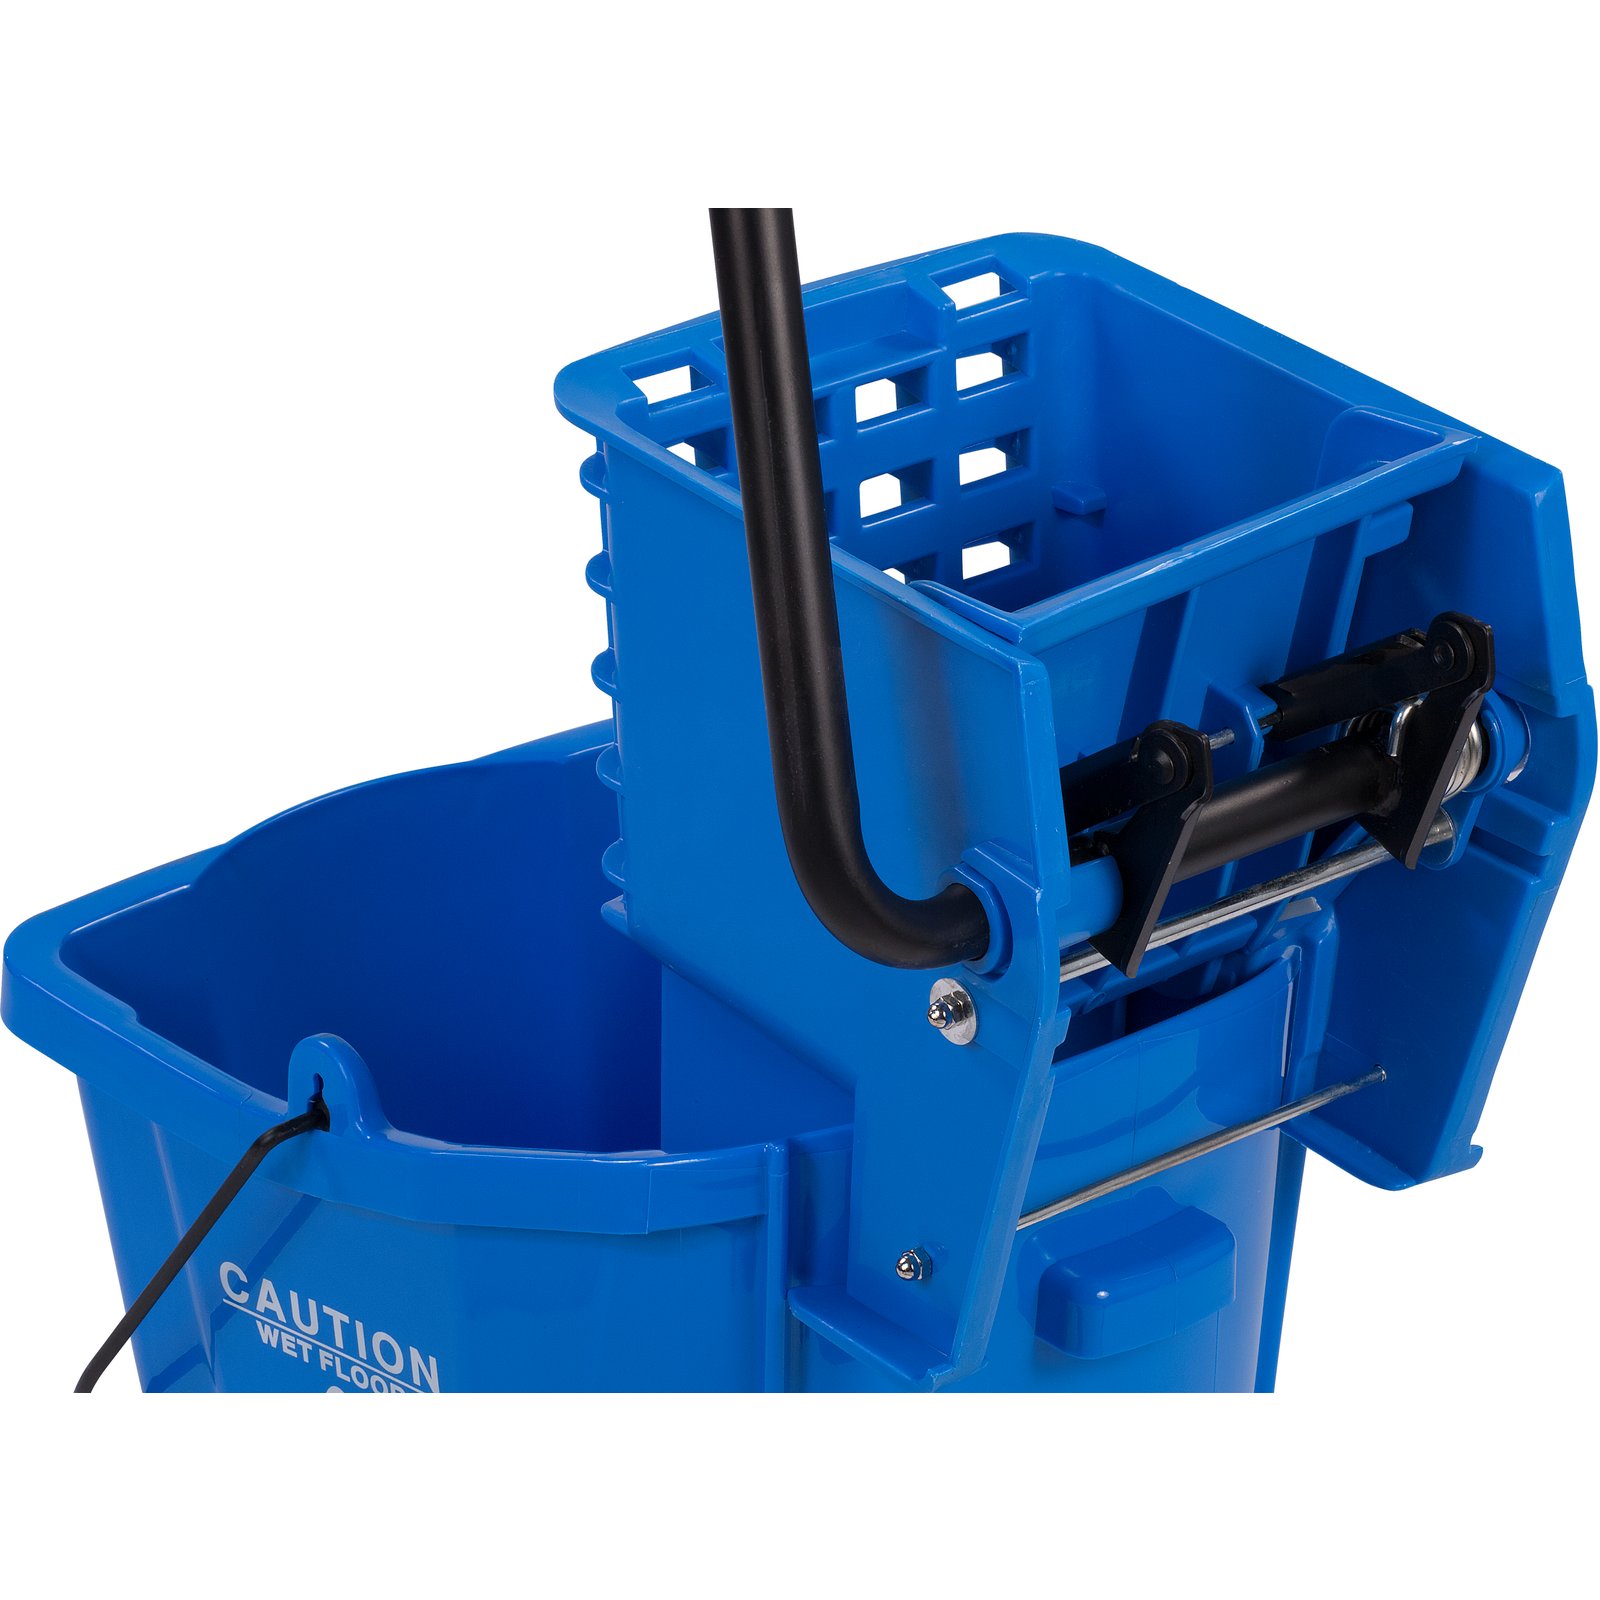 Mop Buckets & Safety Signage  Carlisle FoodService Products